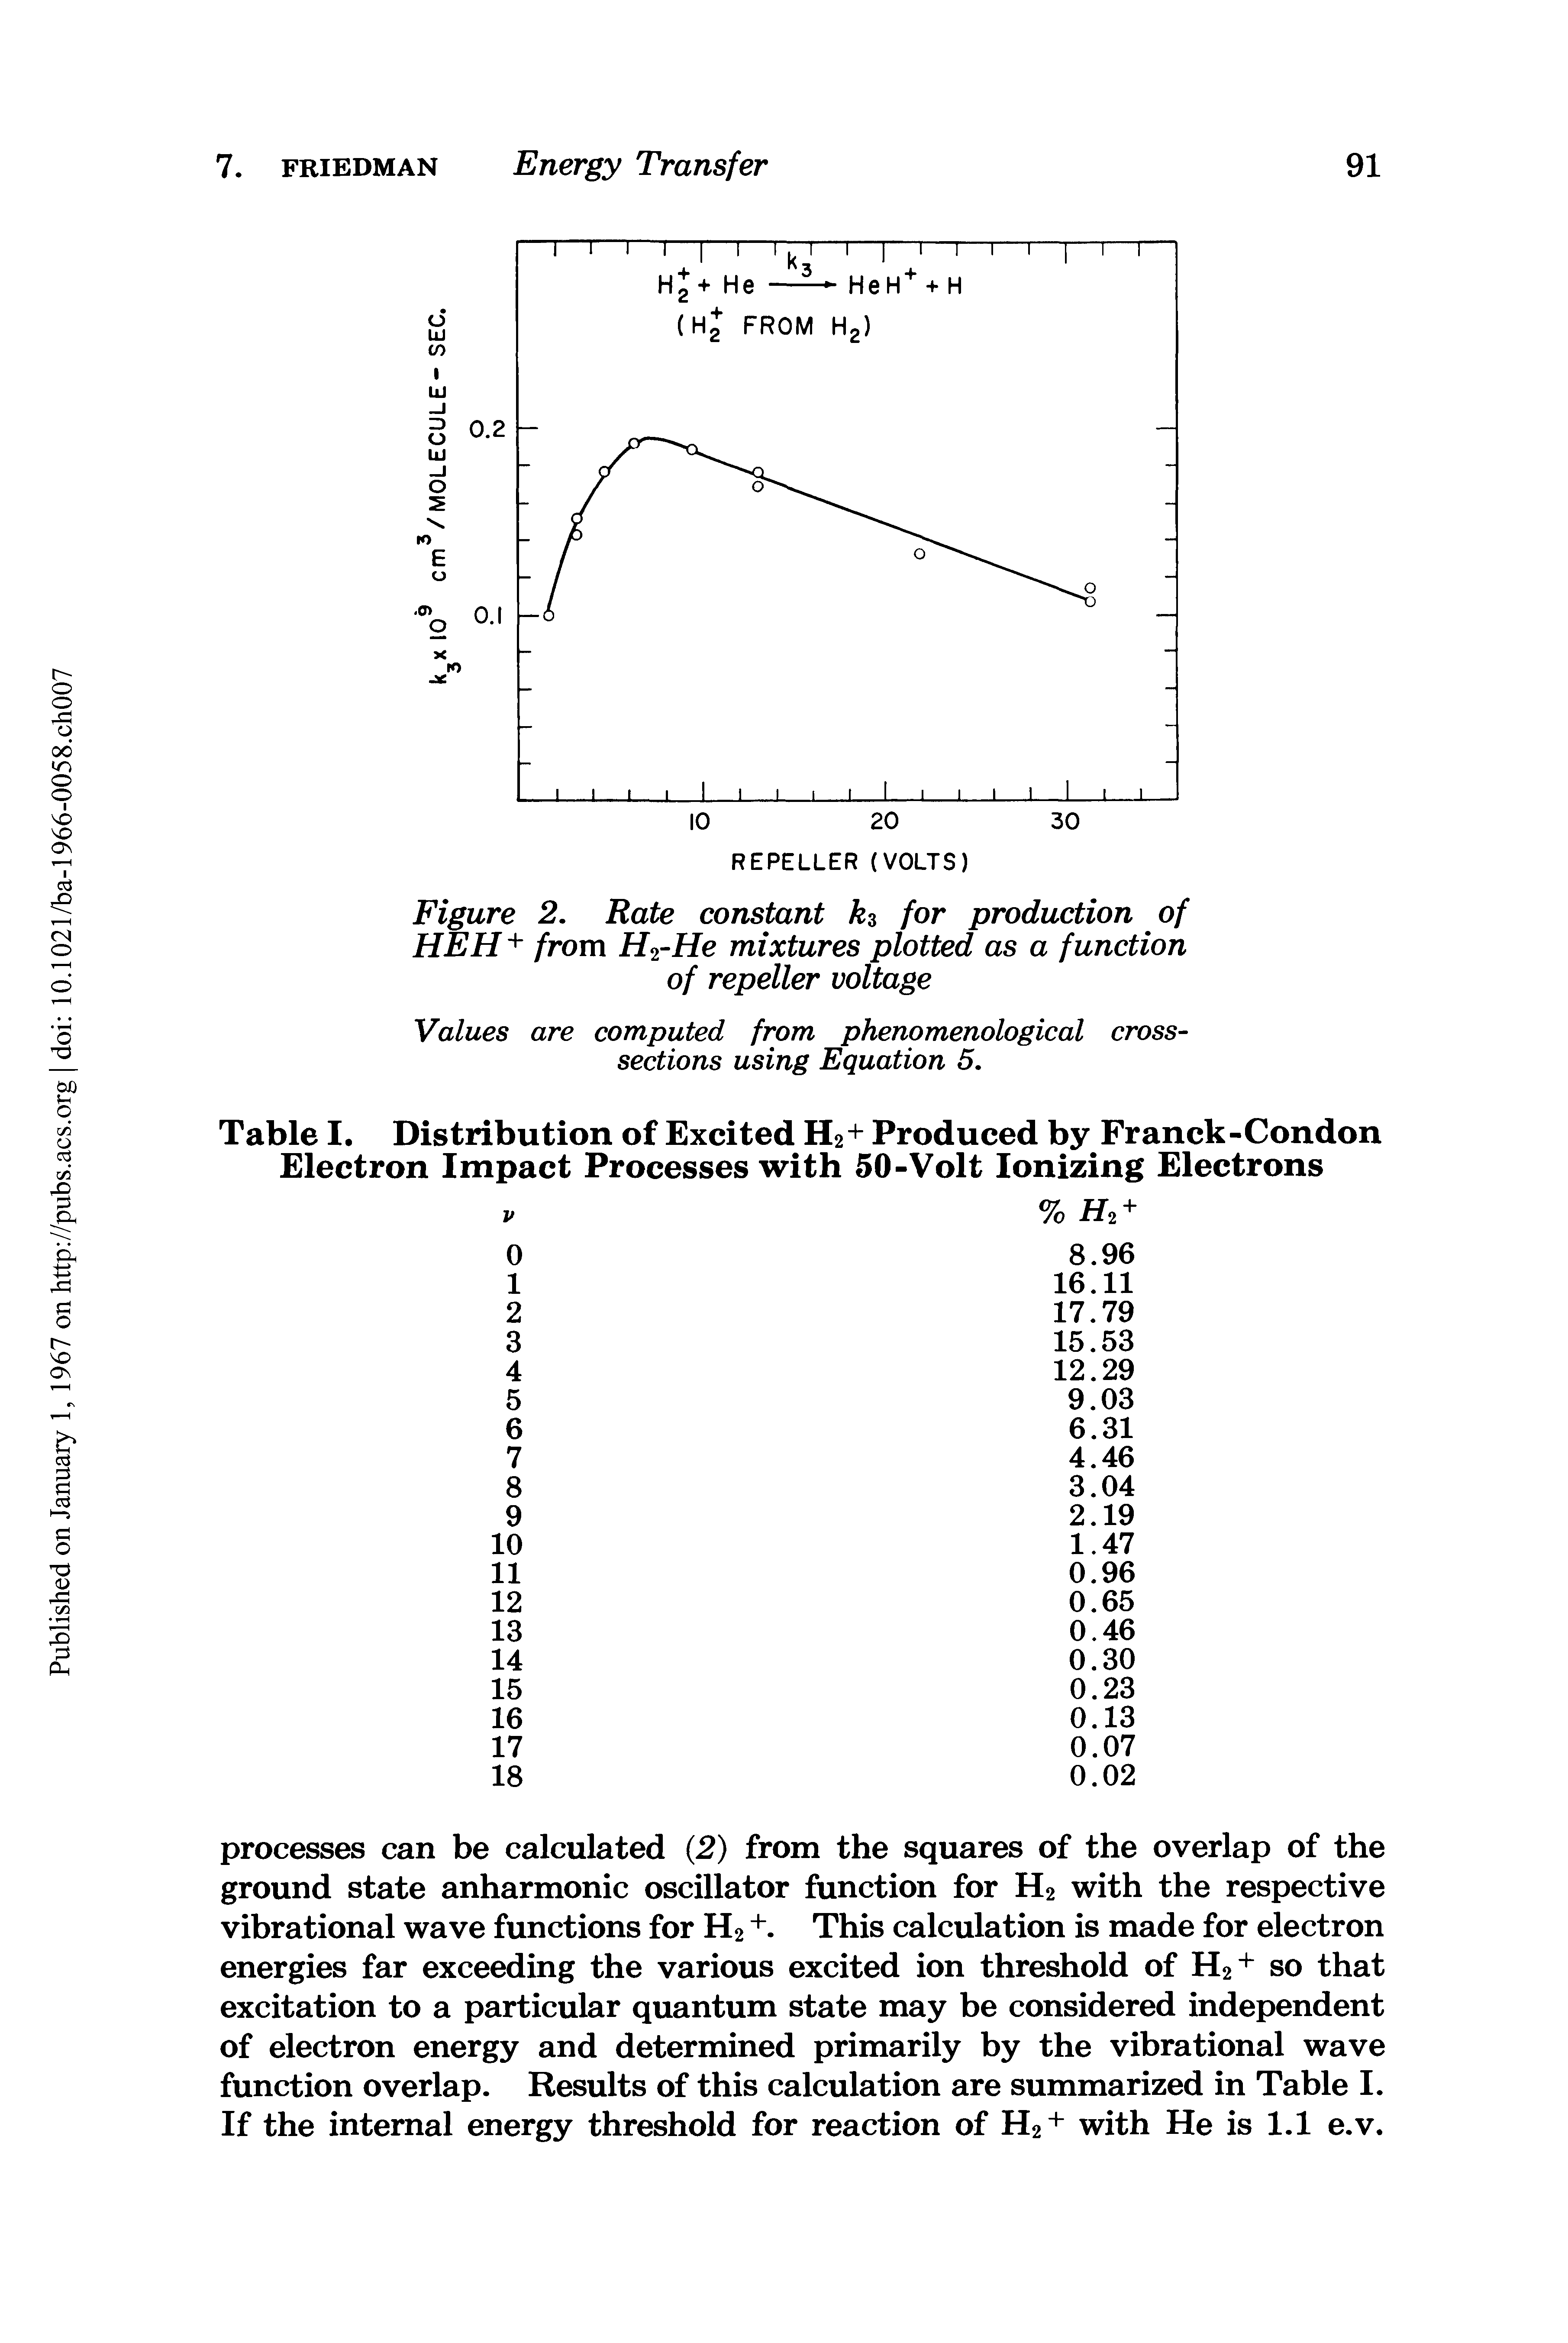 Table I. Distribution of Excited H2+ Produced by Franck-Condon Electron Impact Processes with 50-Volt Ionizing Electrons...